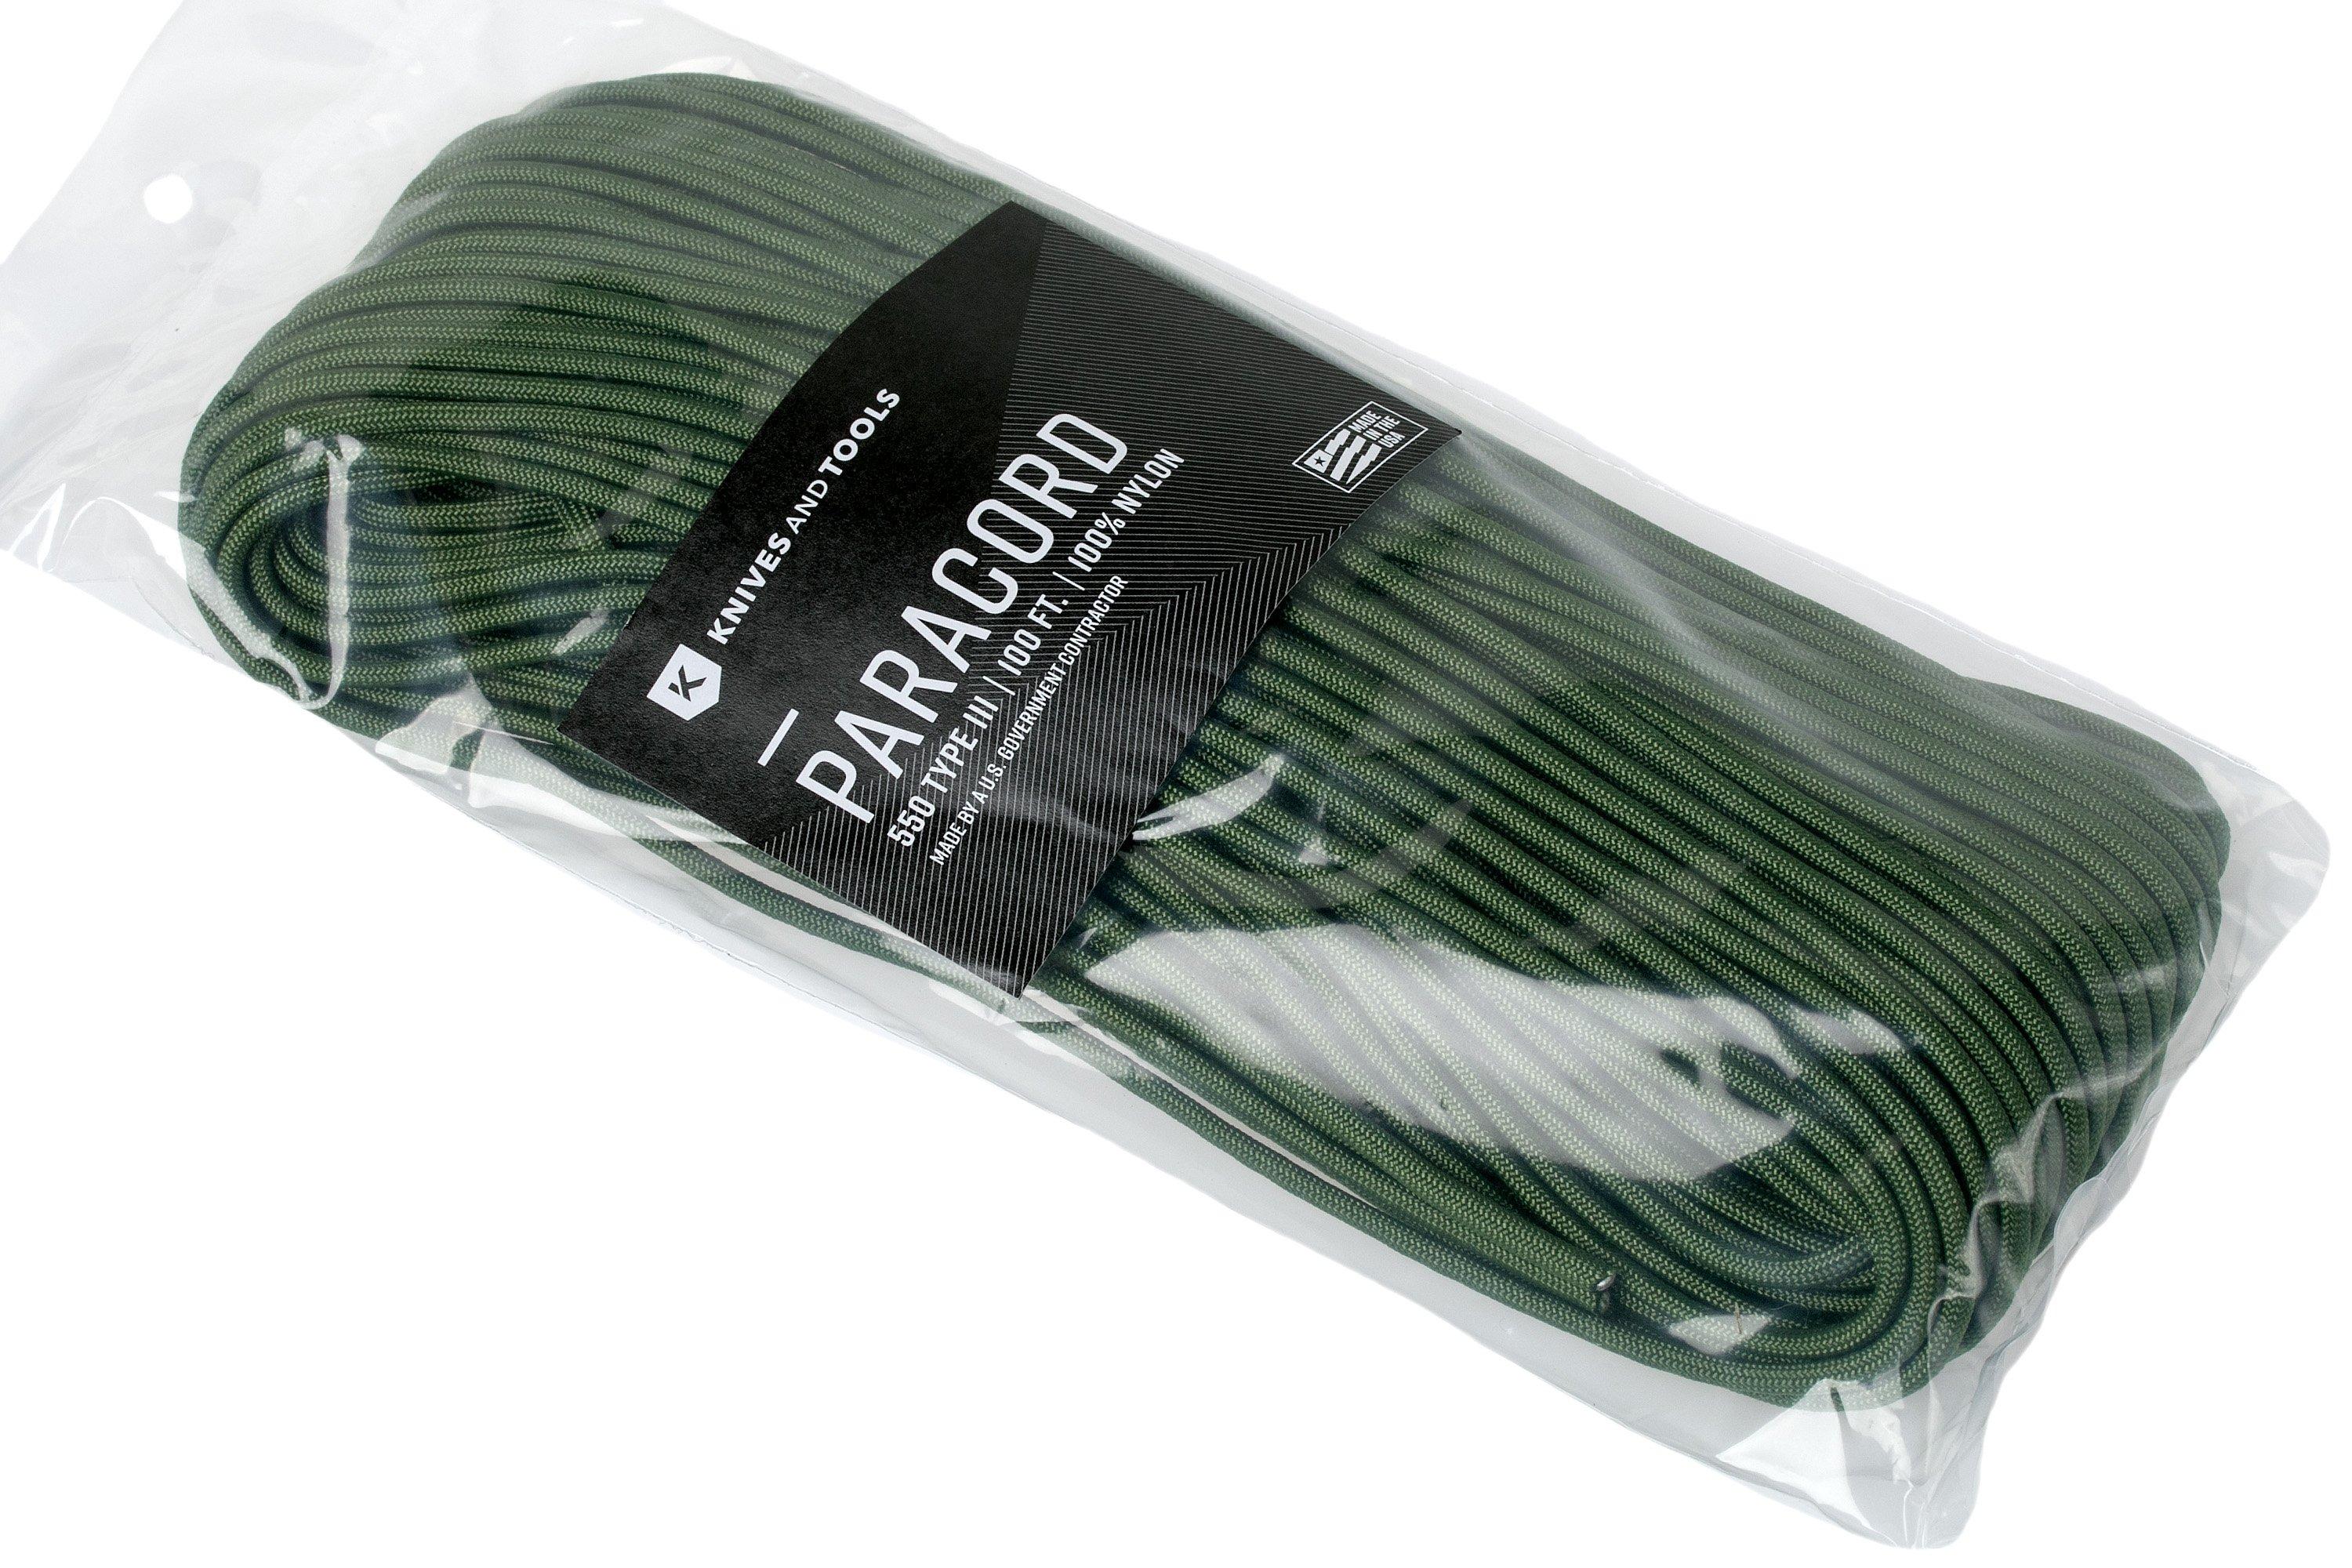 Knivesandtools 550 paracord type III, colour: fern green, 100 ft (30.48 m)